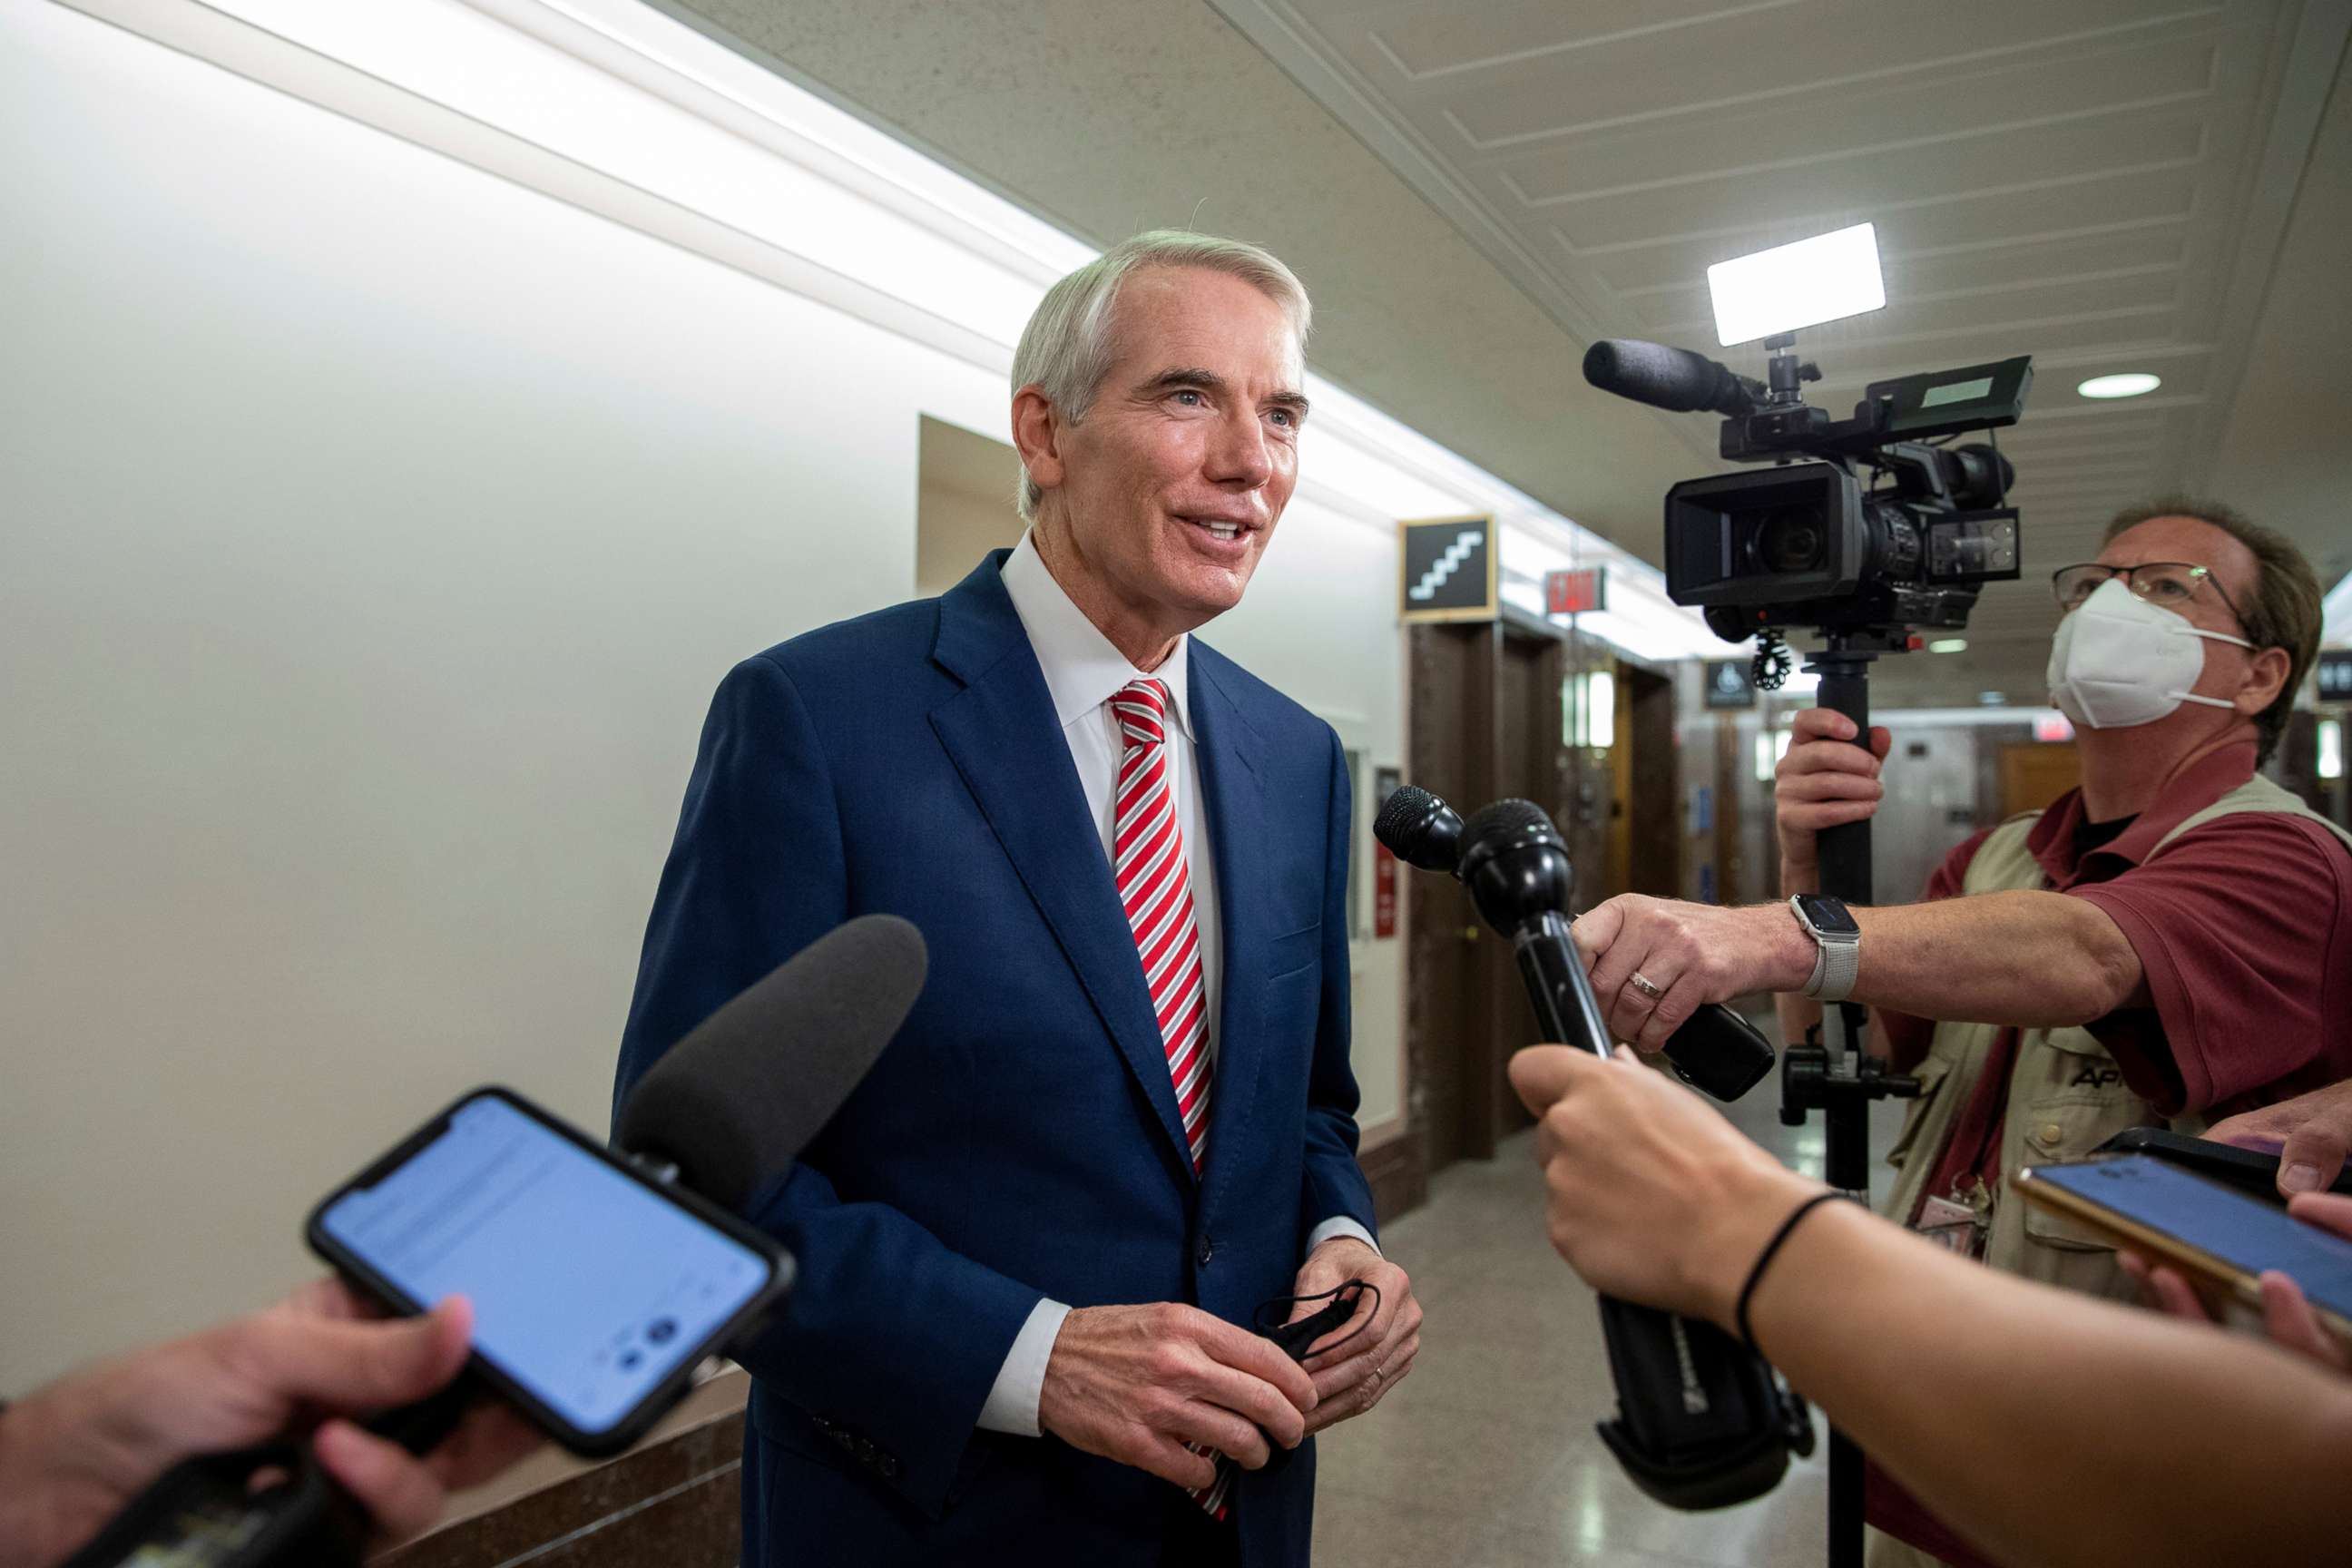 PHOTO: Sen. Rob Portman speaks to members of the media as lawmakers work to advance the $1 trillion bipartisan infrastructure bill at the Capitol in Washington, D.C., Aug. 5, 2021.